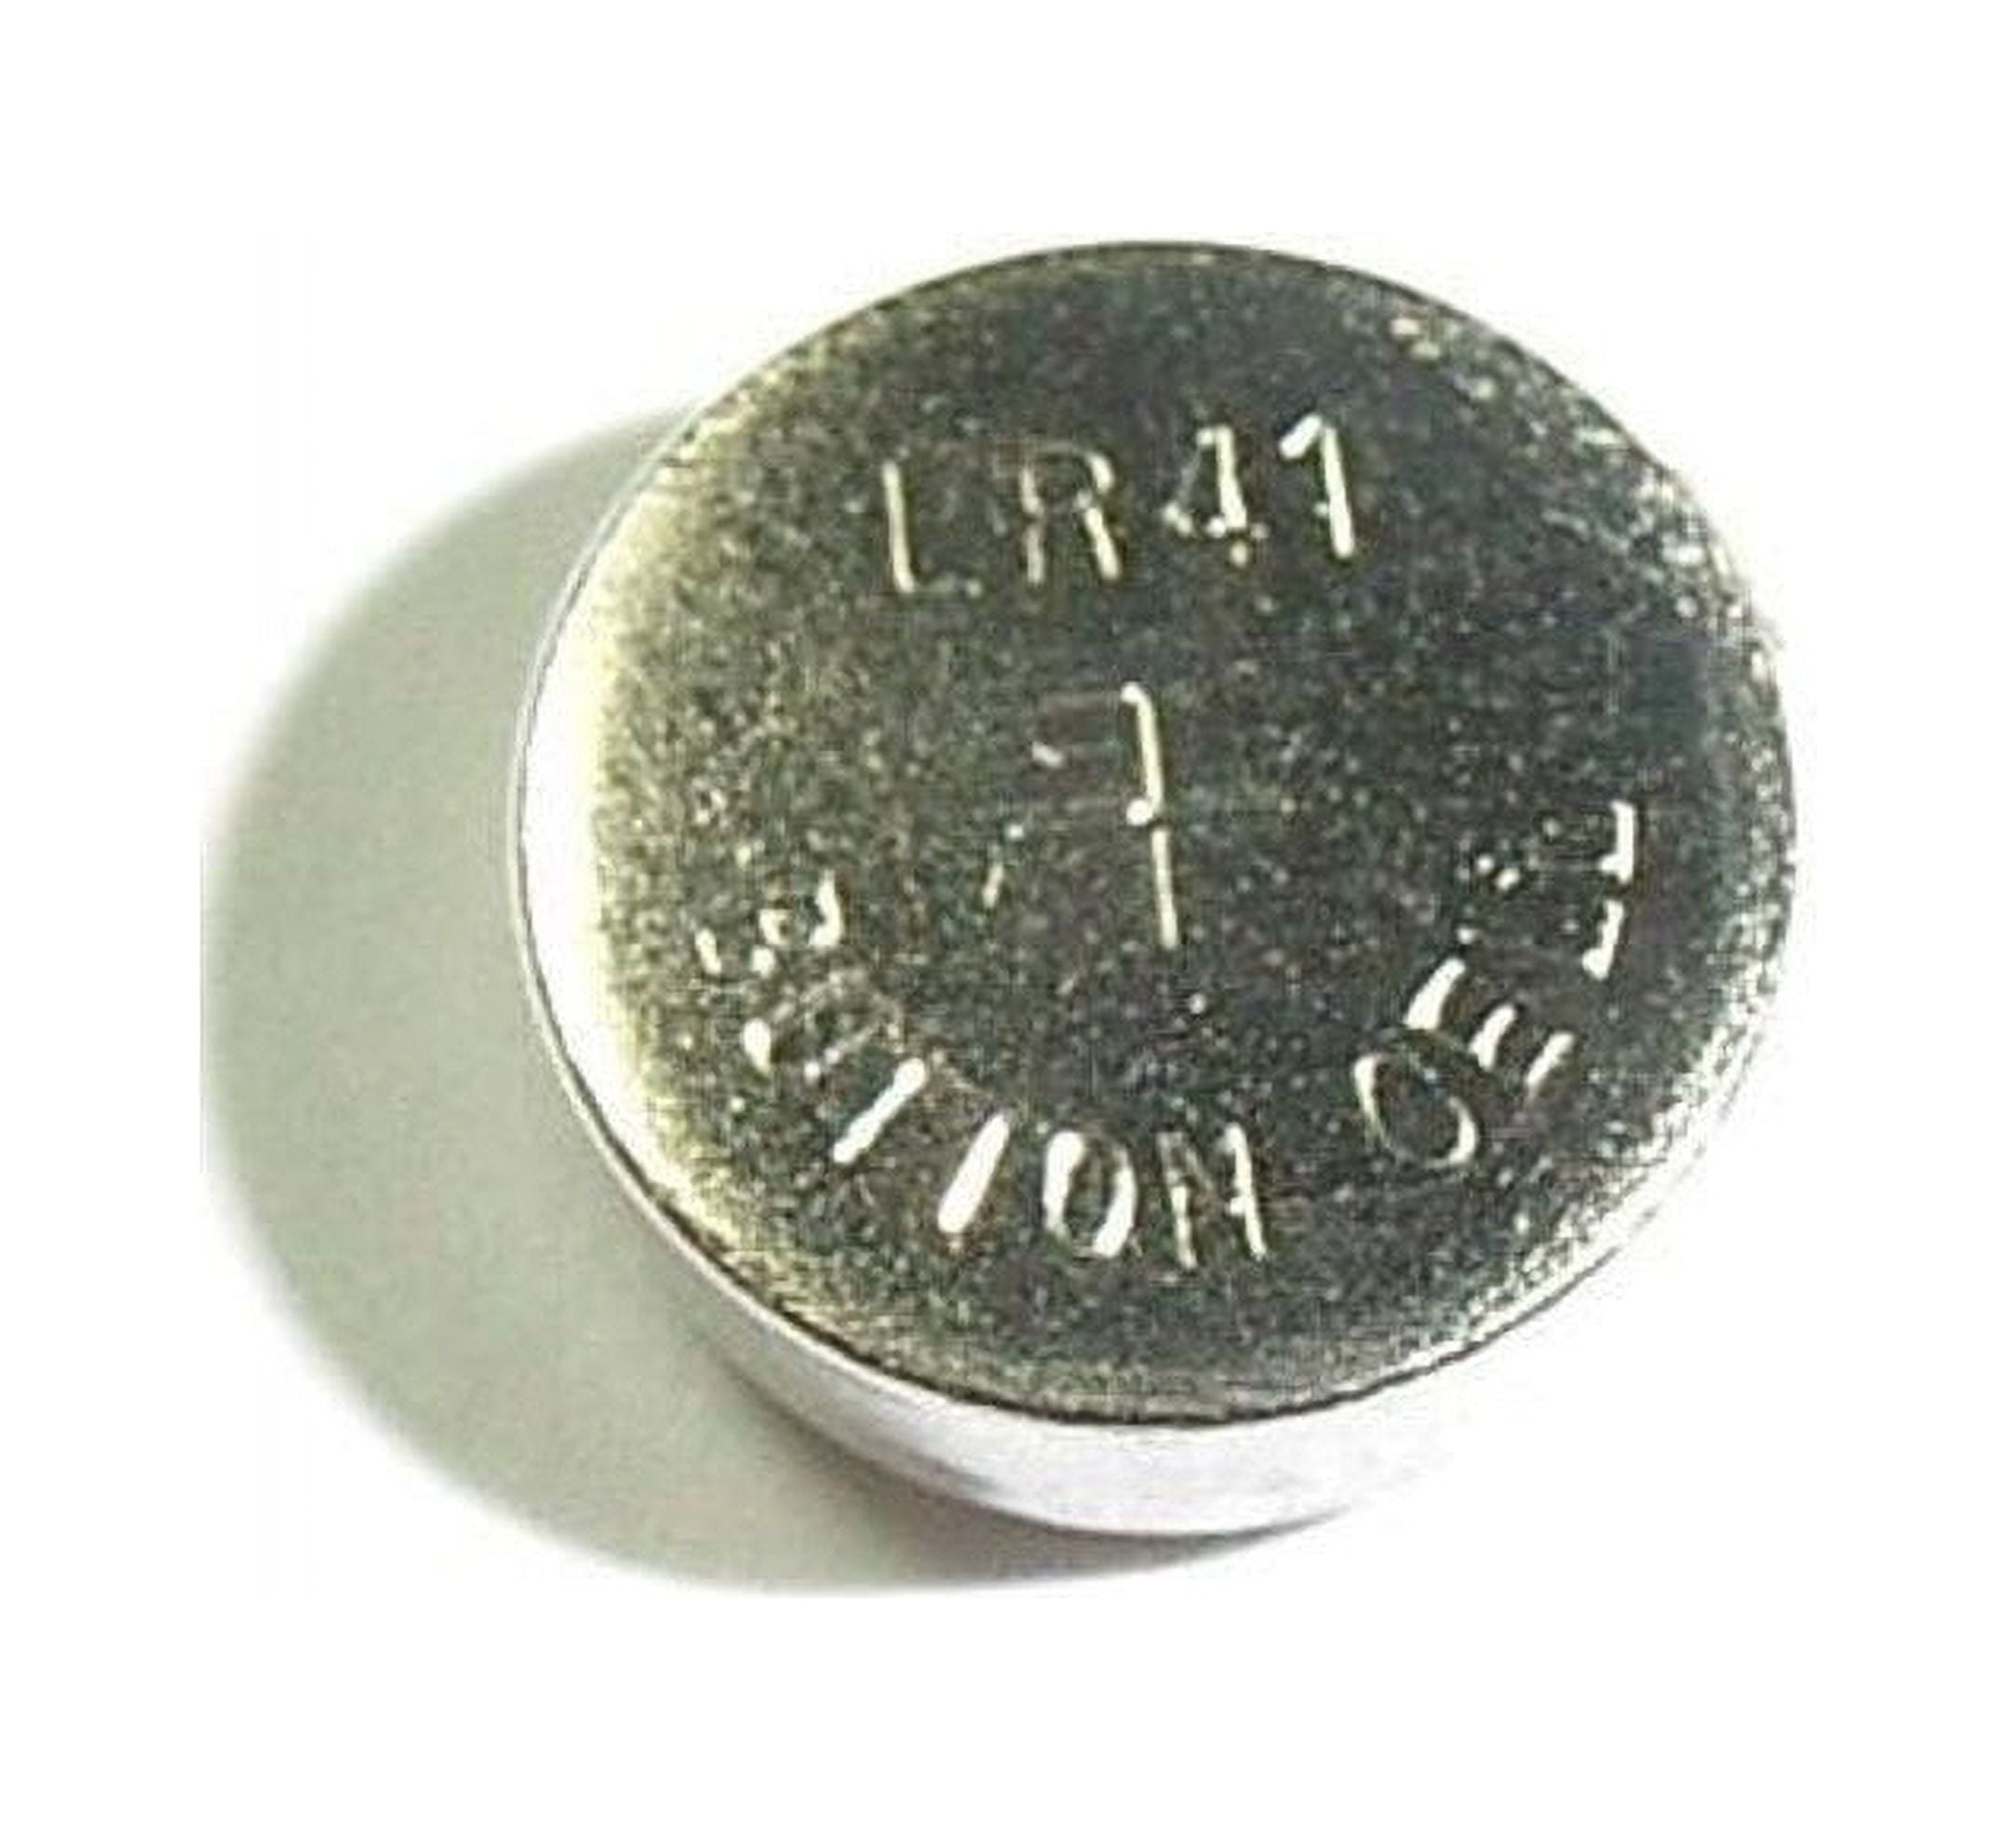 10pk Exell EB-L736 Alkaline 1.5V Watch Battery Replaces AG3 LR41